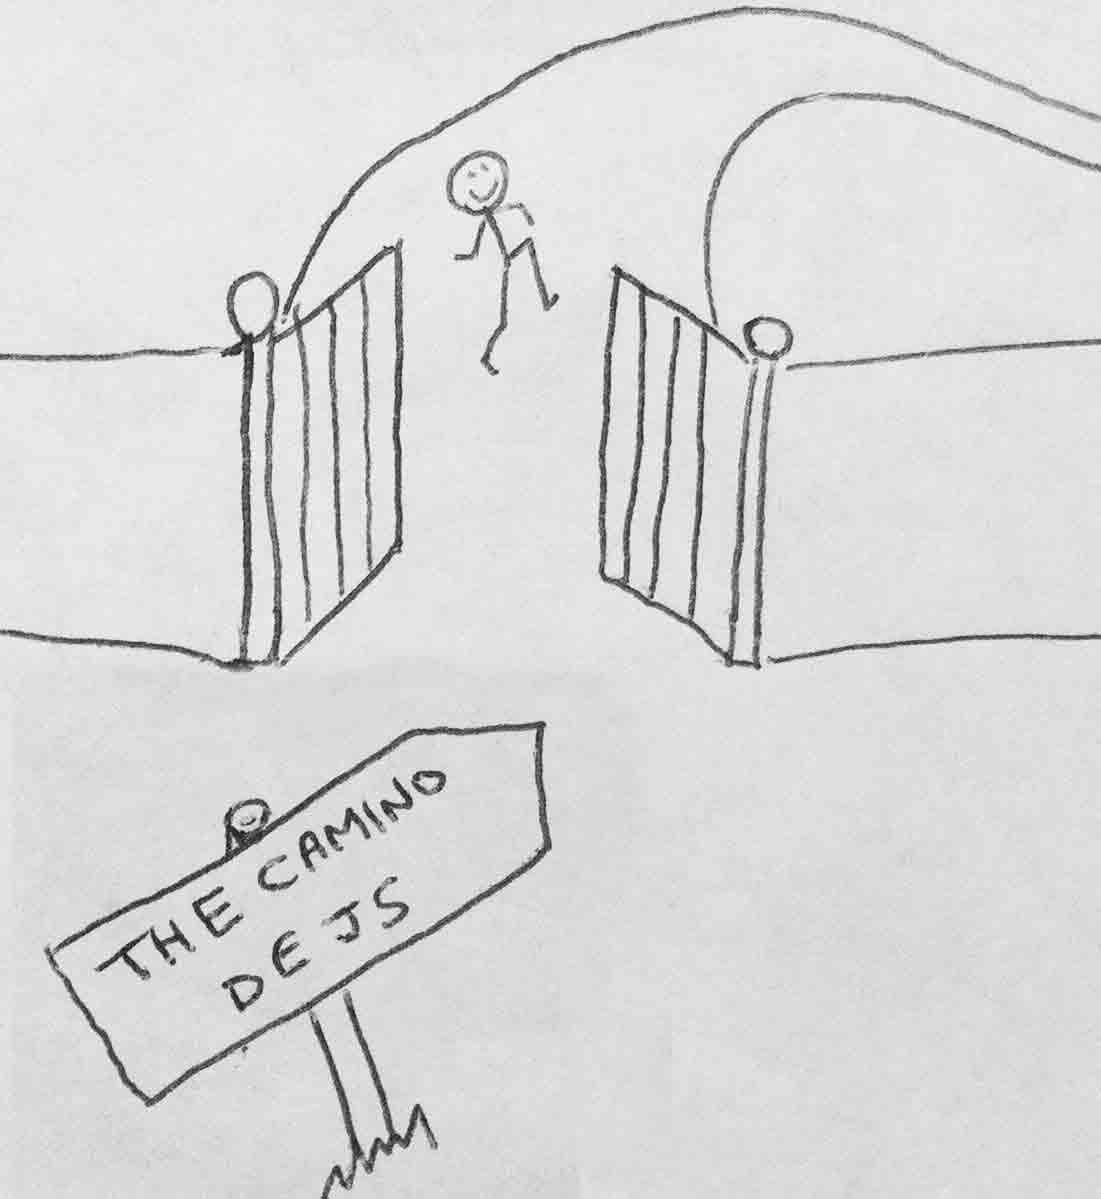 The ninth panel from this comic strip. Our hero, passes through the challenges, exits the second gate and skips happily along the Camino de JS.